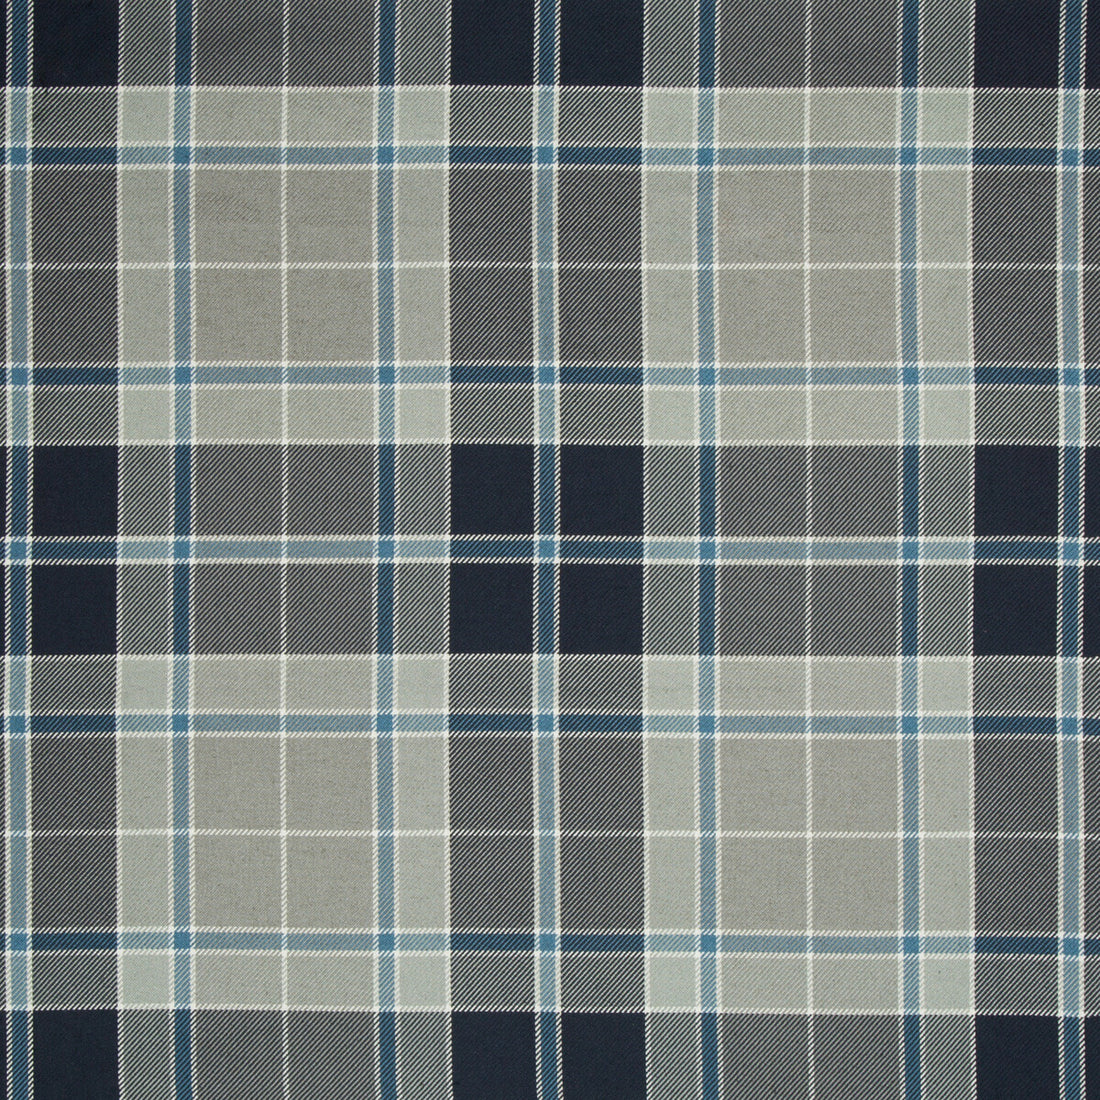 Handsome Plaid fabric in delft color - pattern 34793.511.0 - by Kravet Couture in the David Phoenix Well-Suited collection